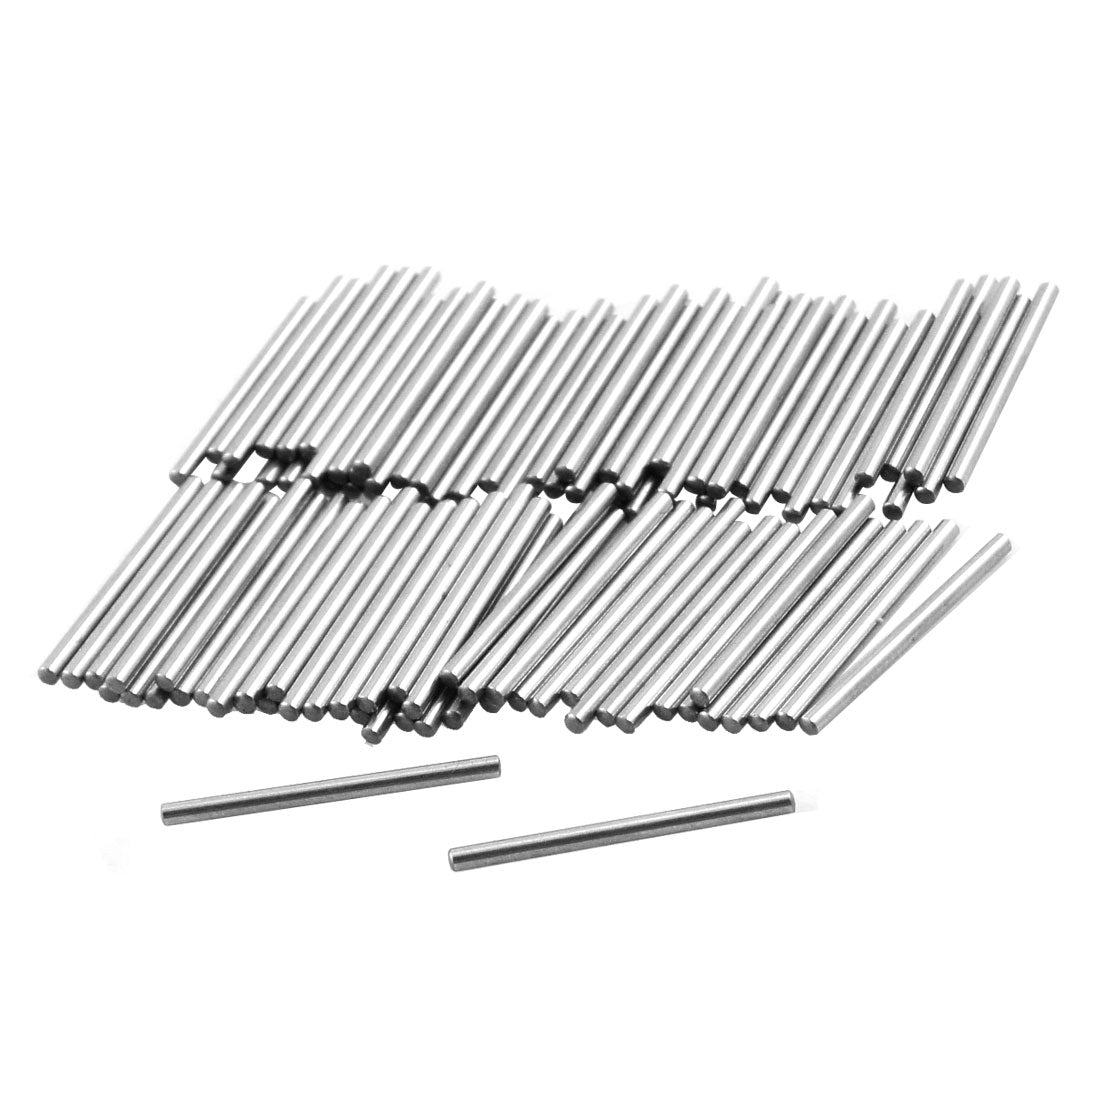 uxcell Uxcell 100 Pcs Stainless Steel 1.1mm x 15.8mm Dowel Pins Fasten Elements